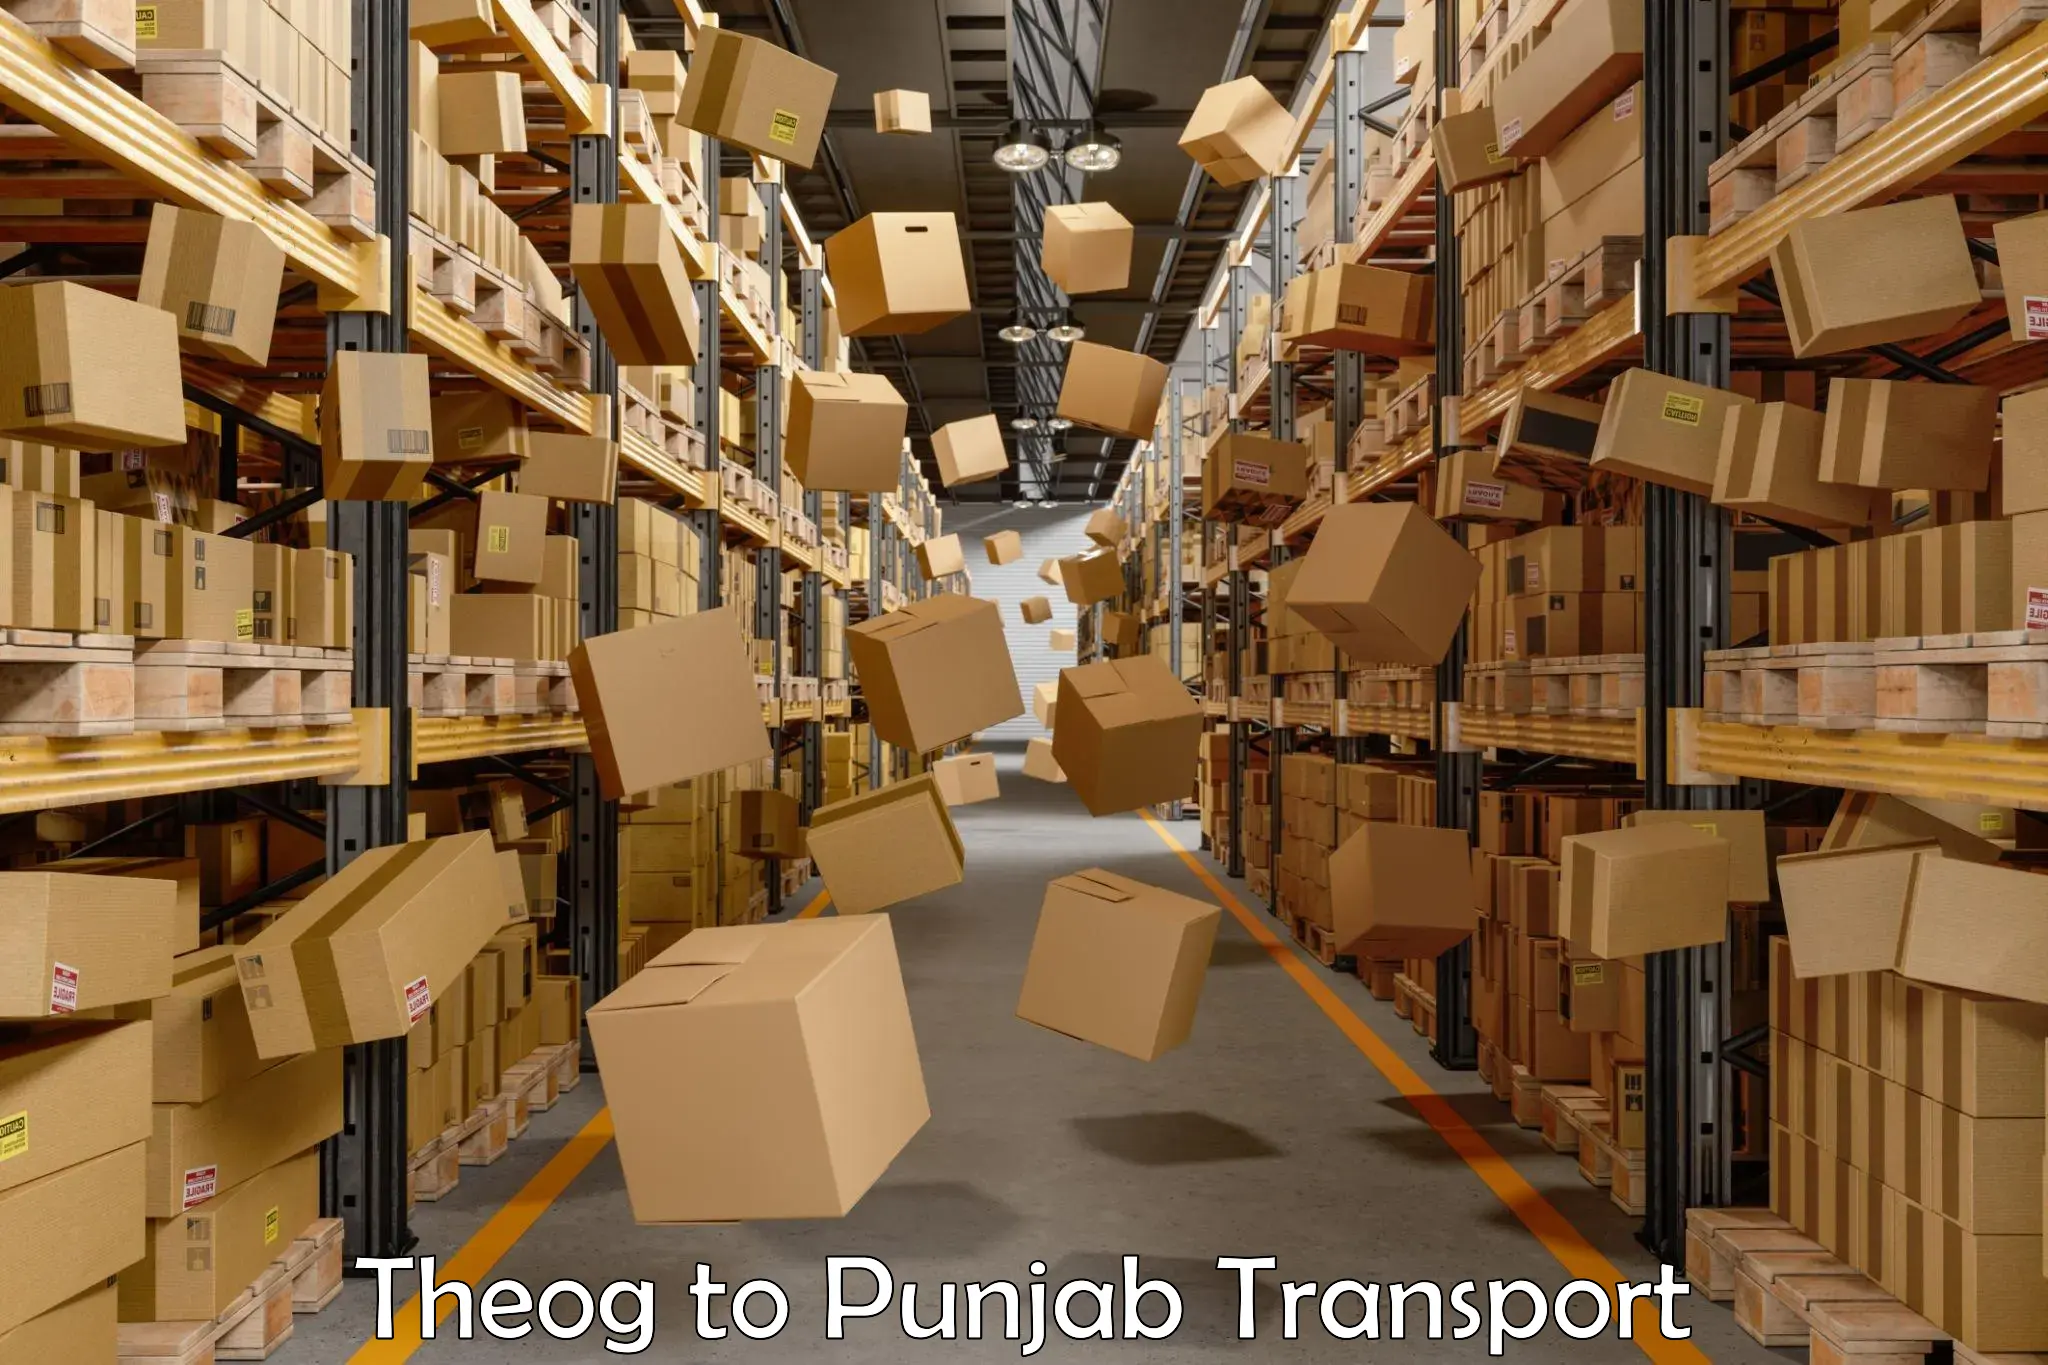 Container transport service Theog to Punjab